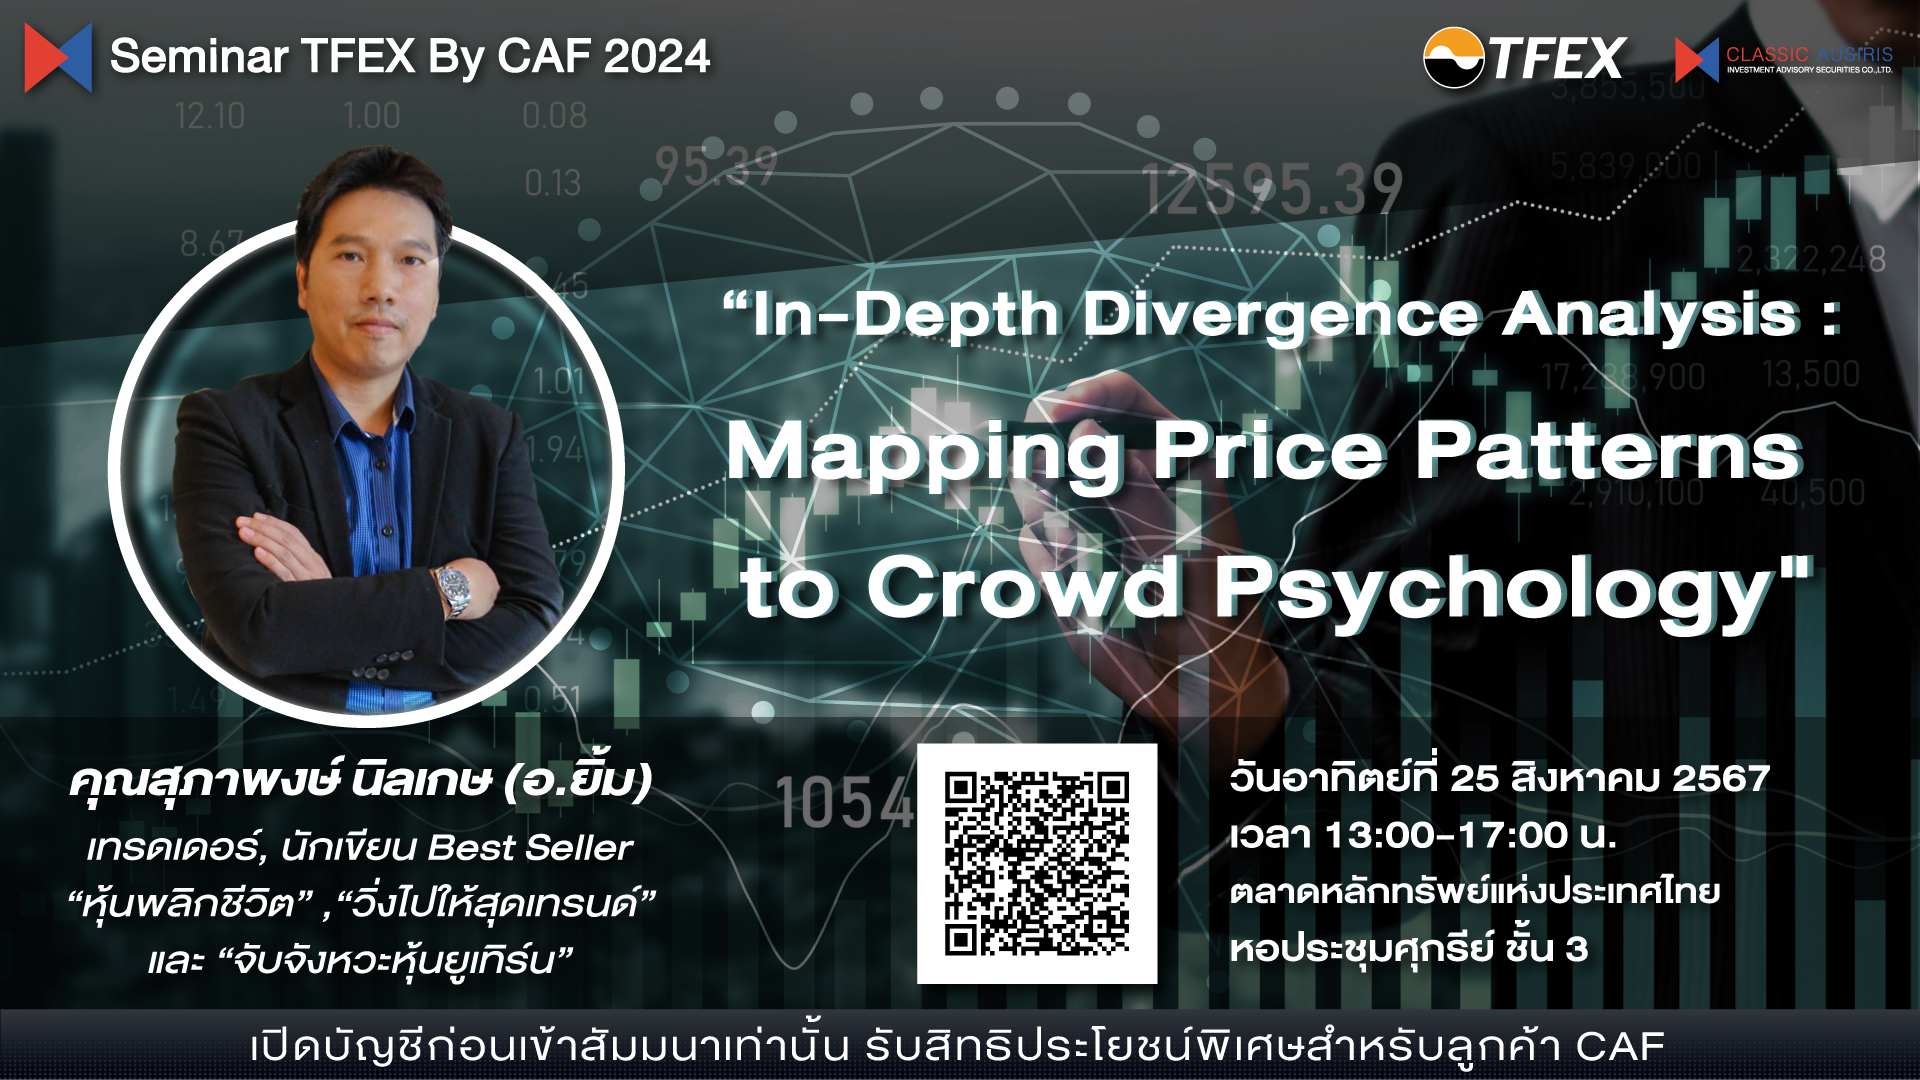 DivergenceAnalysis ,TFEX ,CAF ,cafseminar ,สัมมนาTFEX 